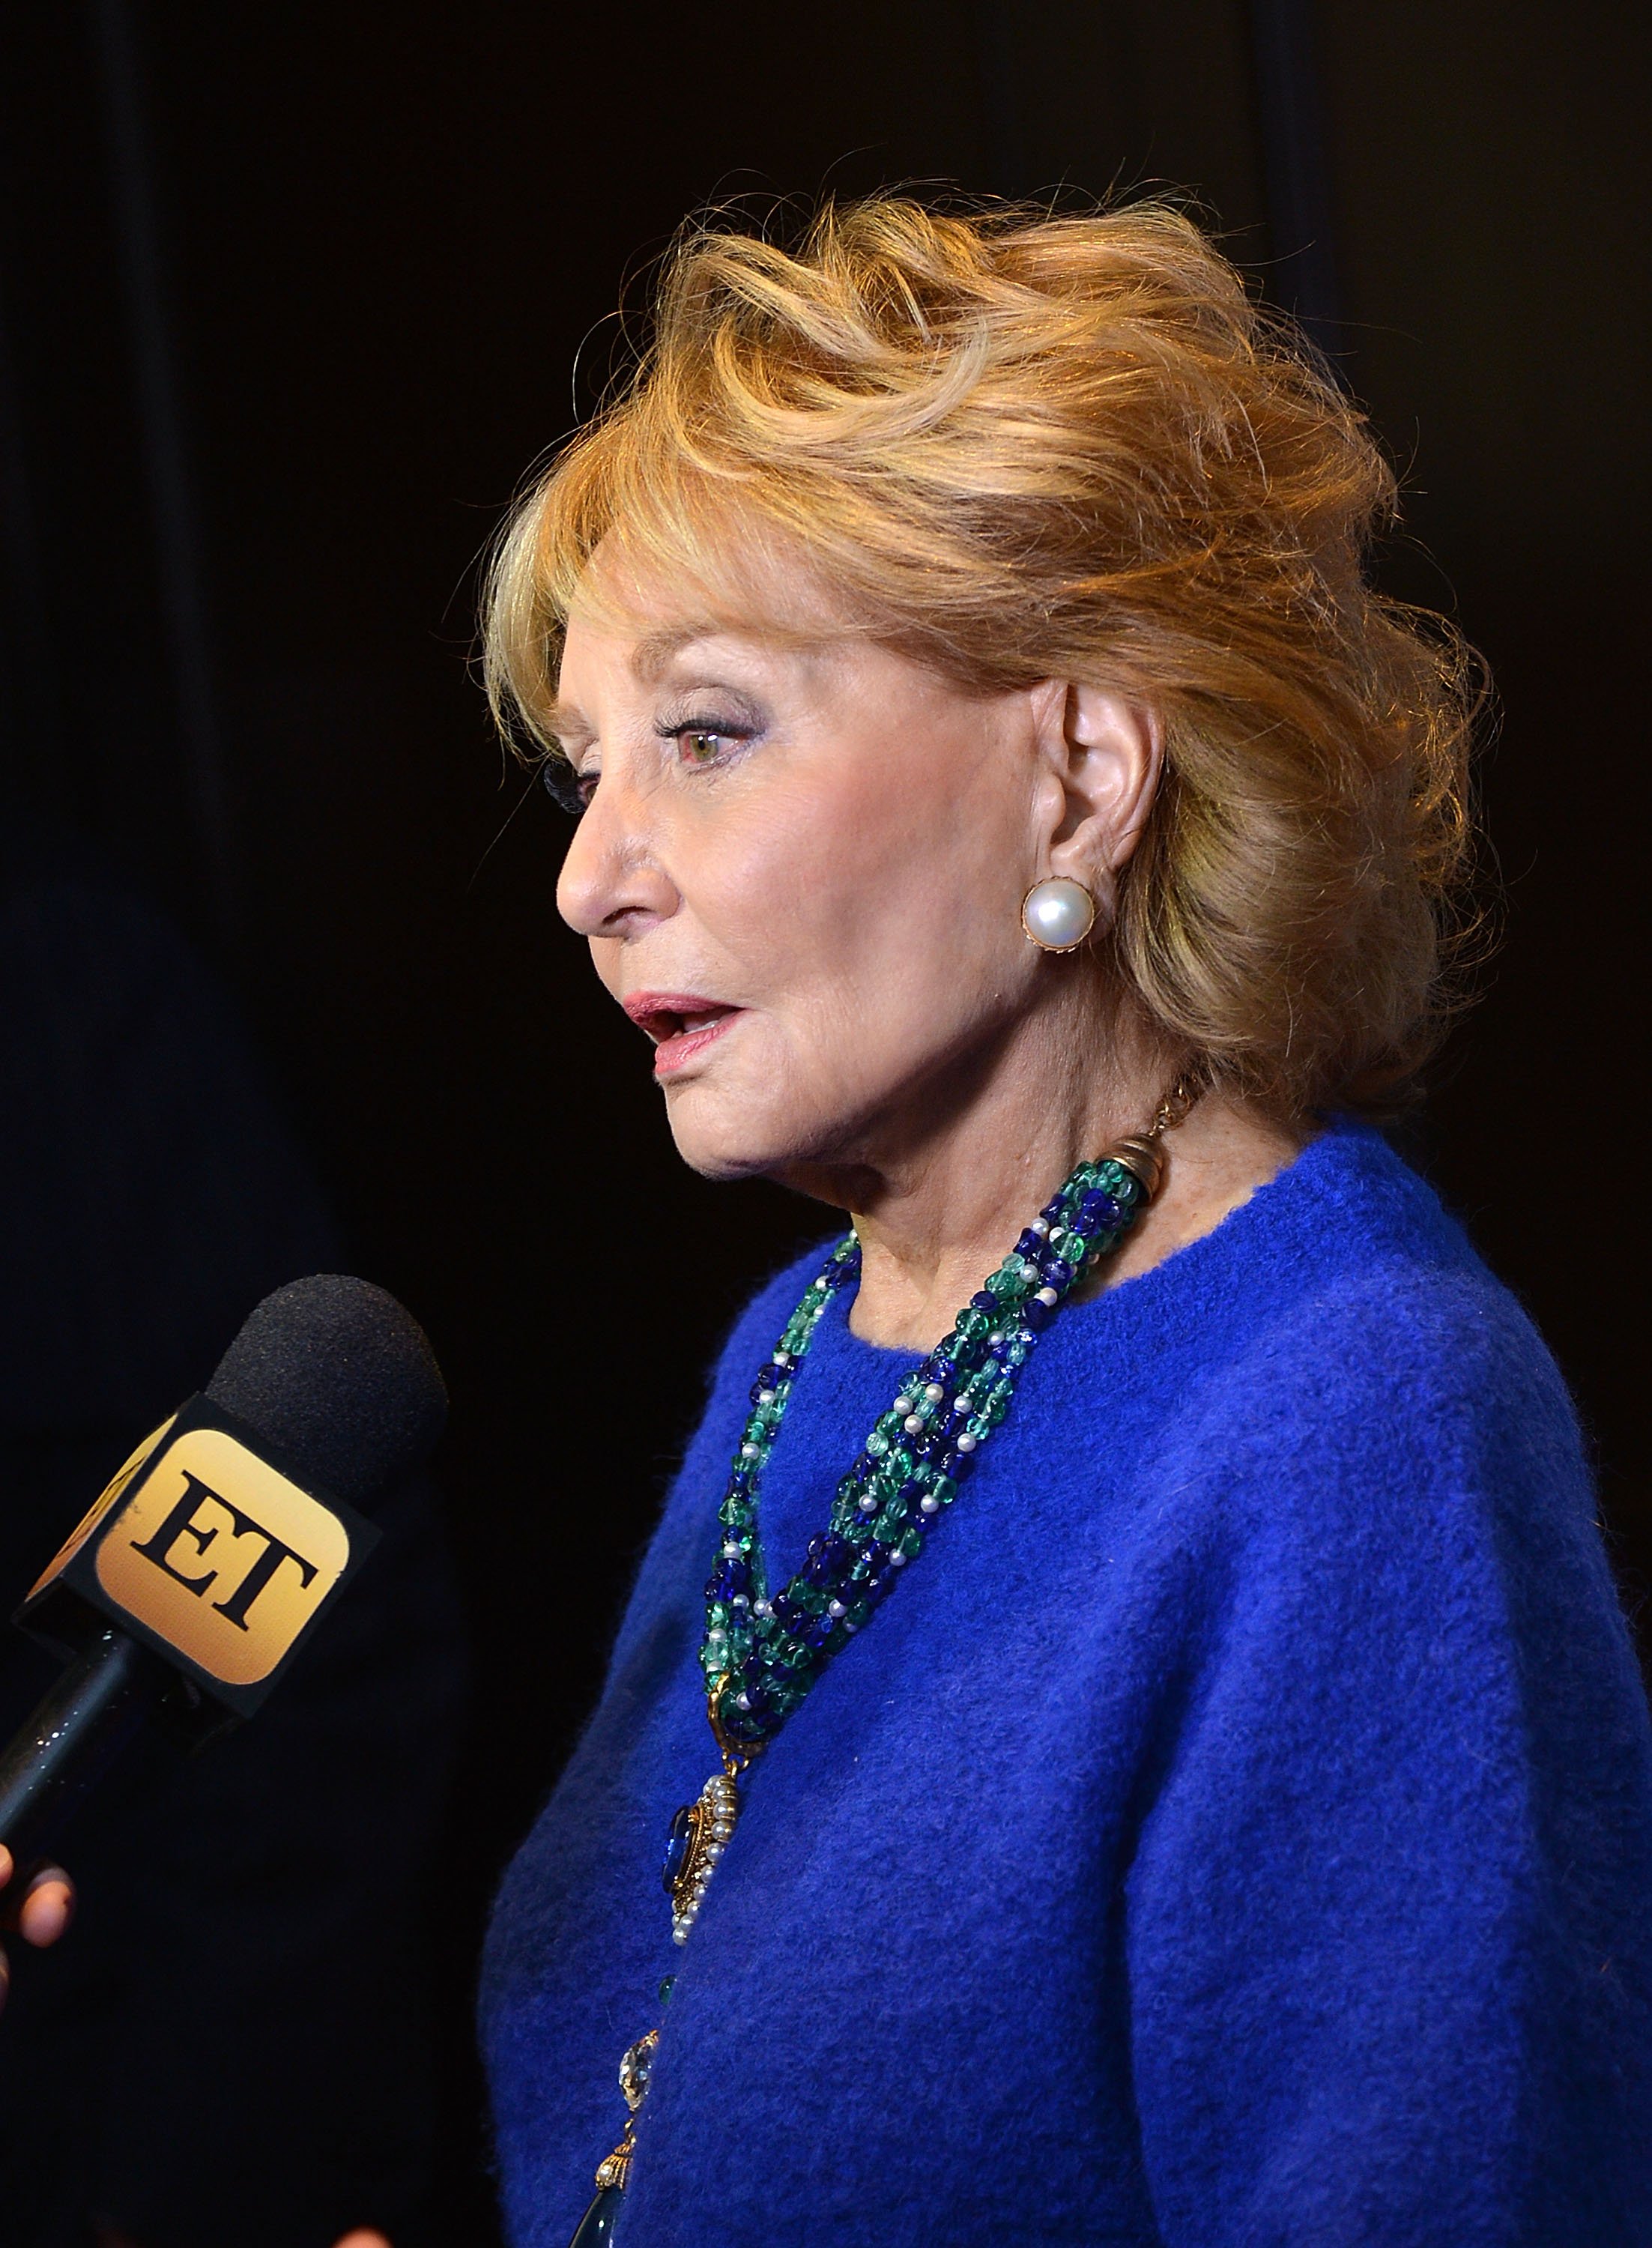 Barbara Walters during The Breast Cancer Research Foundation's Symposium & Awards Luncheon at The Waldorf Astoria on October 9, 2014 in New York City. / Source: Getty Images